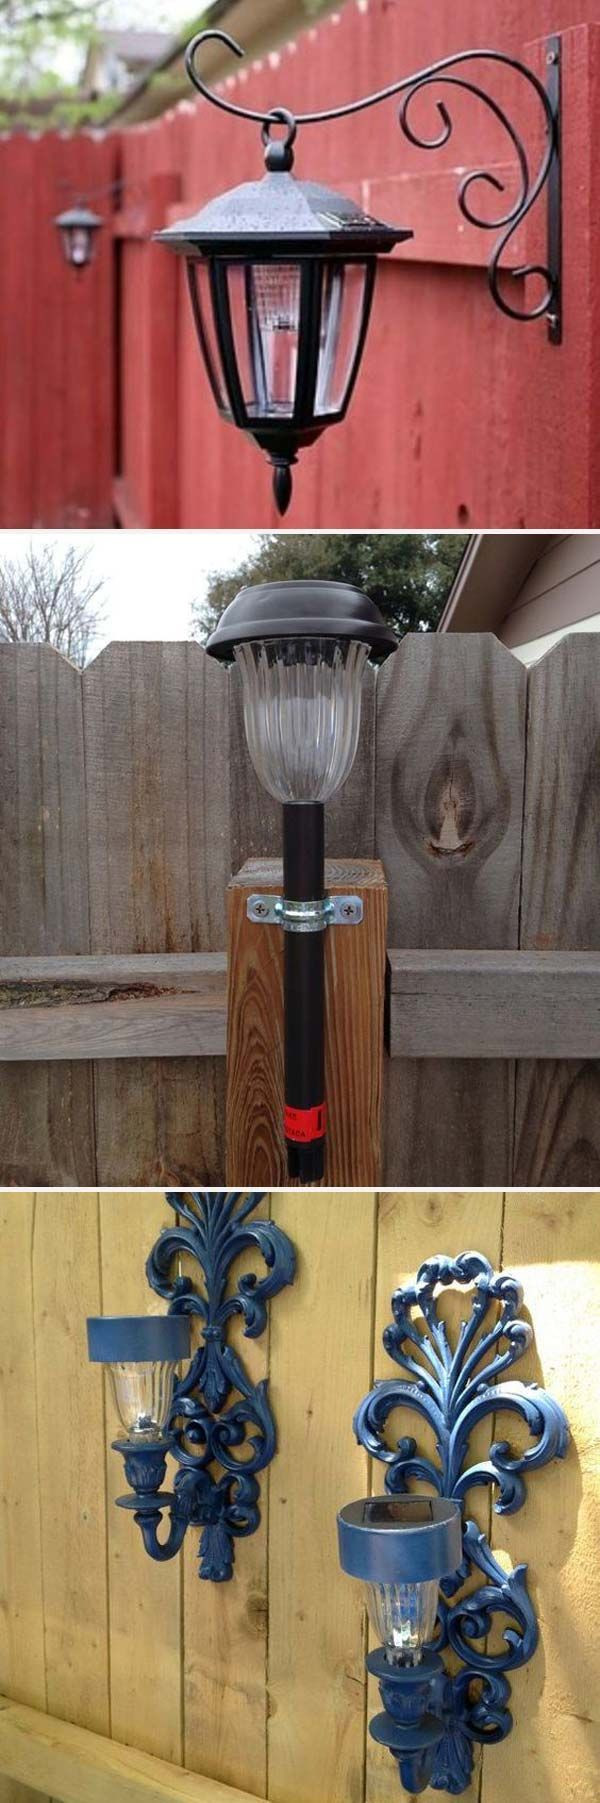 DIY Solar Lights Outdoor
 Decorate your fence by hanging dollar store solar lights